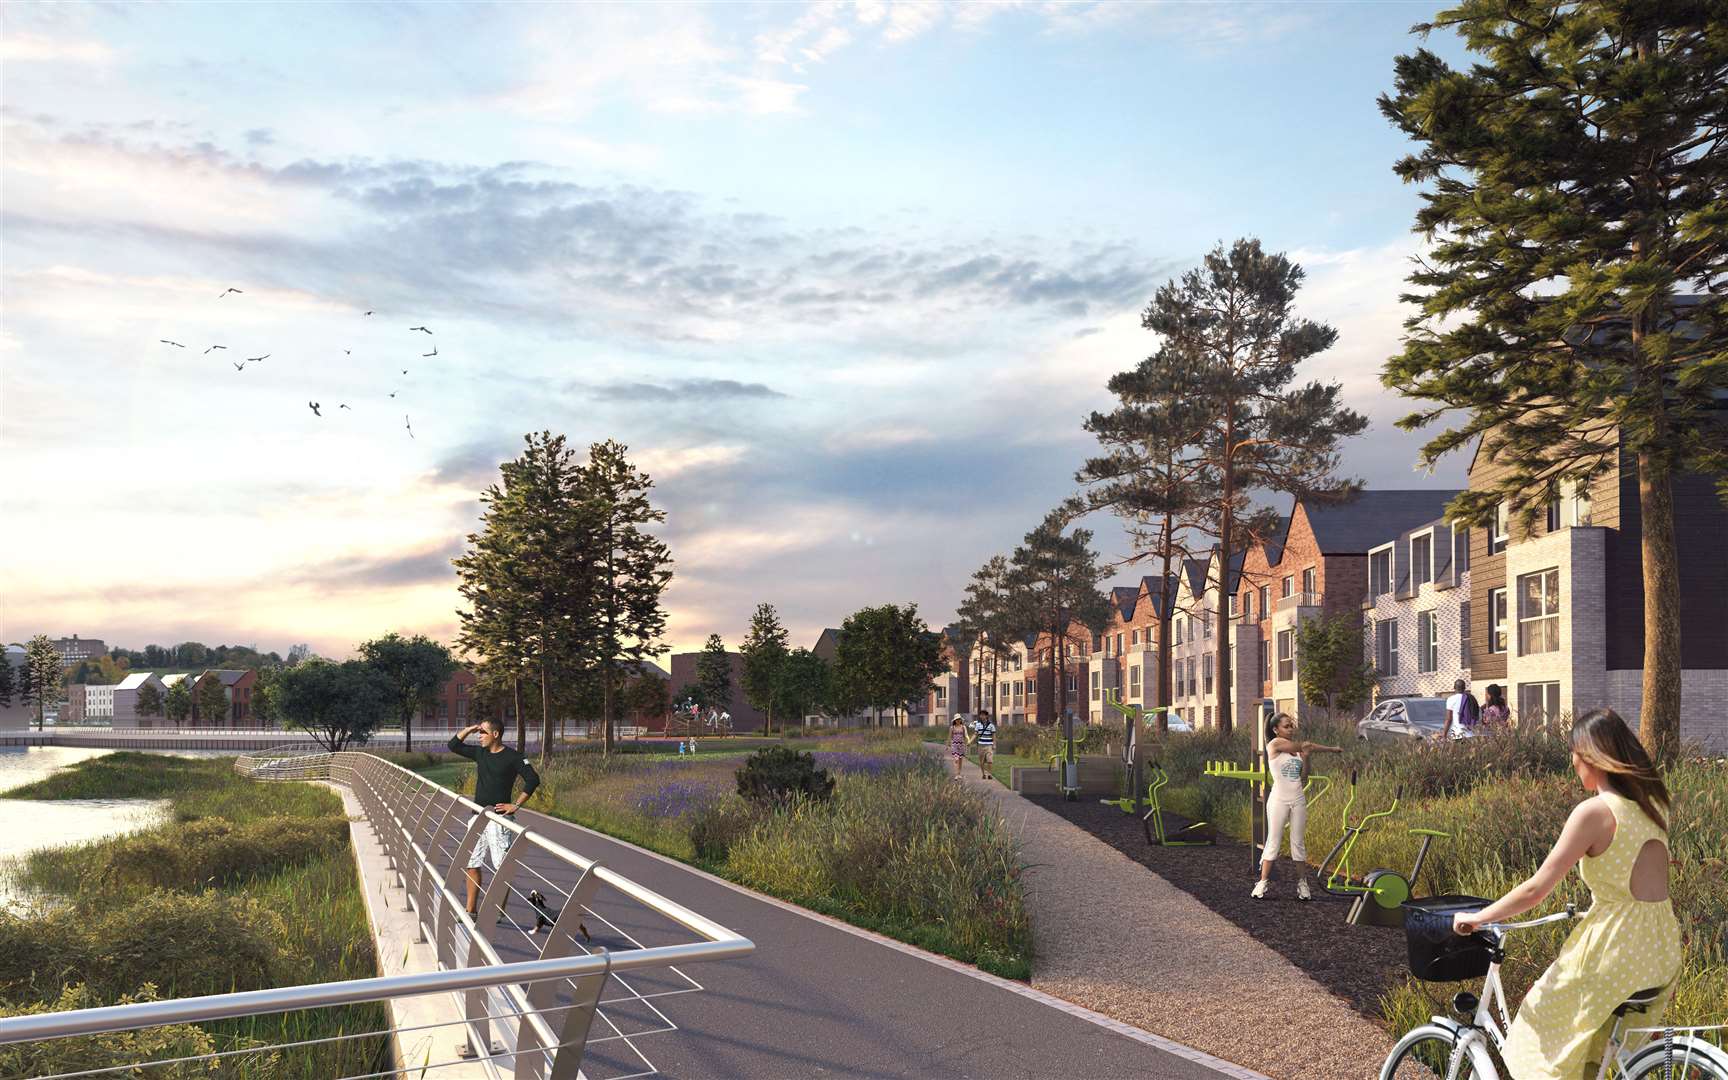 A planning application has been submitted for the £400 million Rochester Riverside development